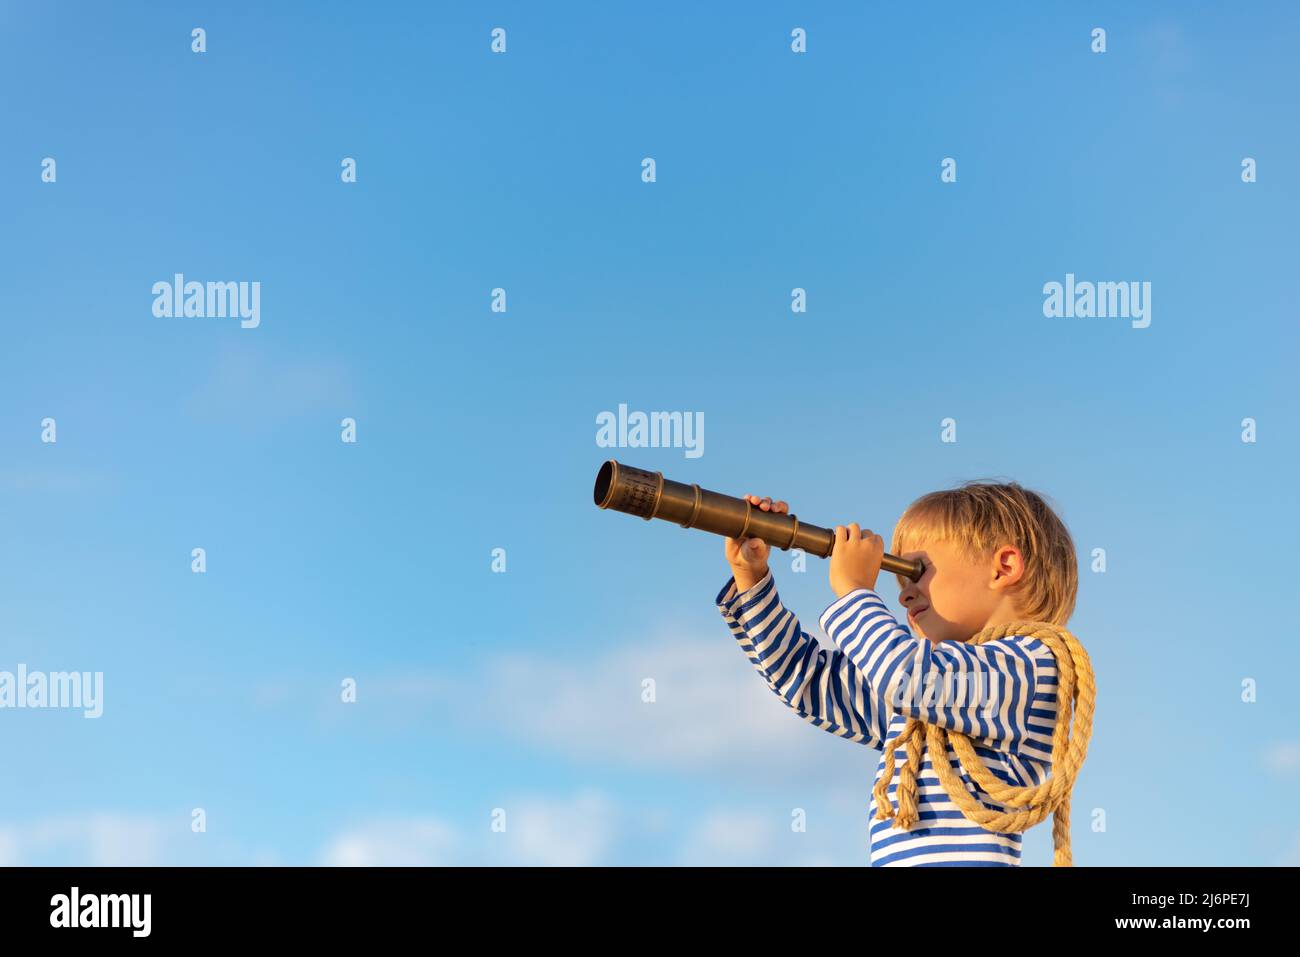 Happy child looking through vintage spyglass against blue sky. Kid having fun in summer. Imagination and freedom concept. Stock Photo